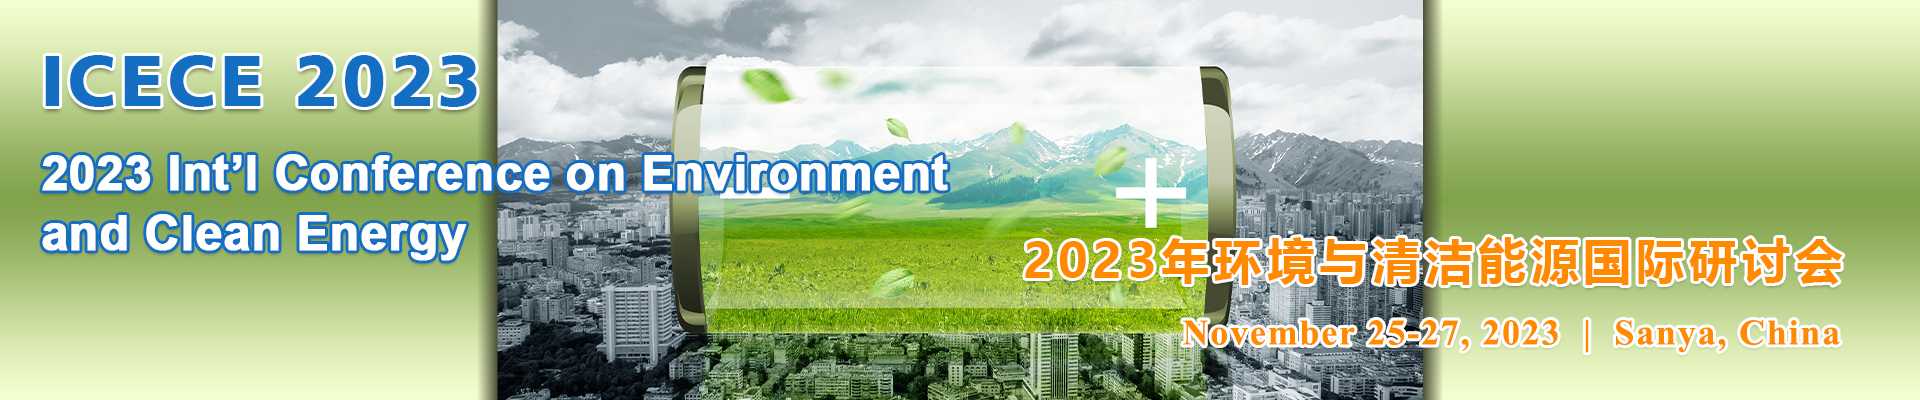 2023 Int’l Conference on Environment and Clean Energy (ICECE 2023)